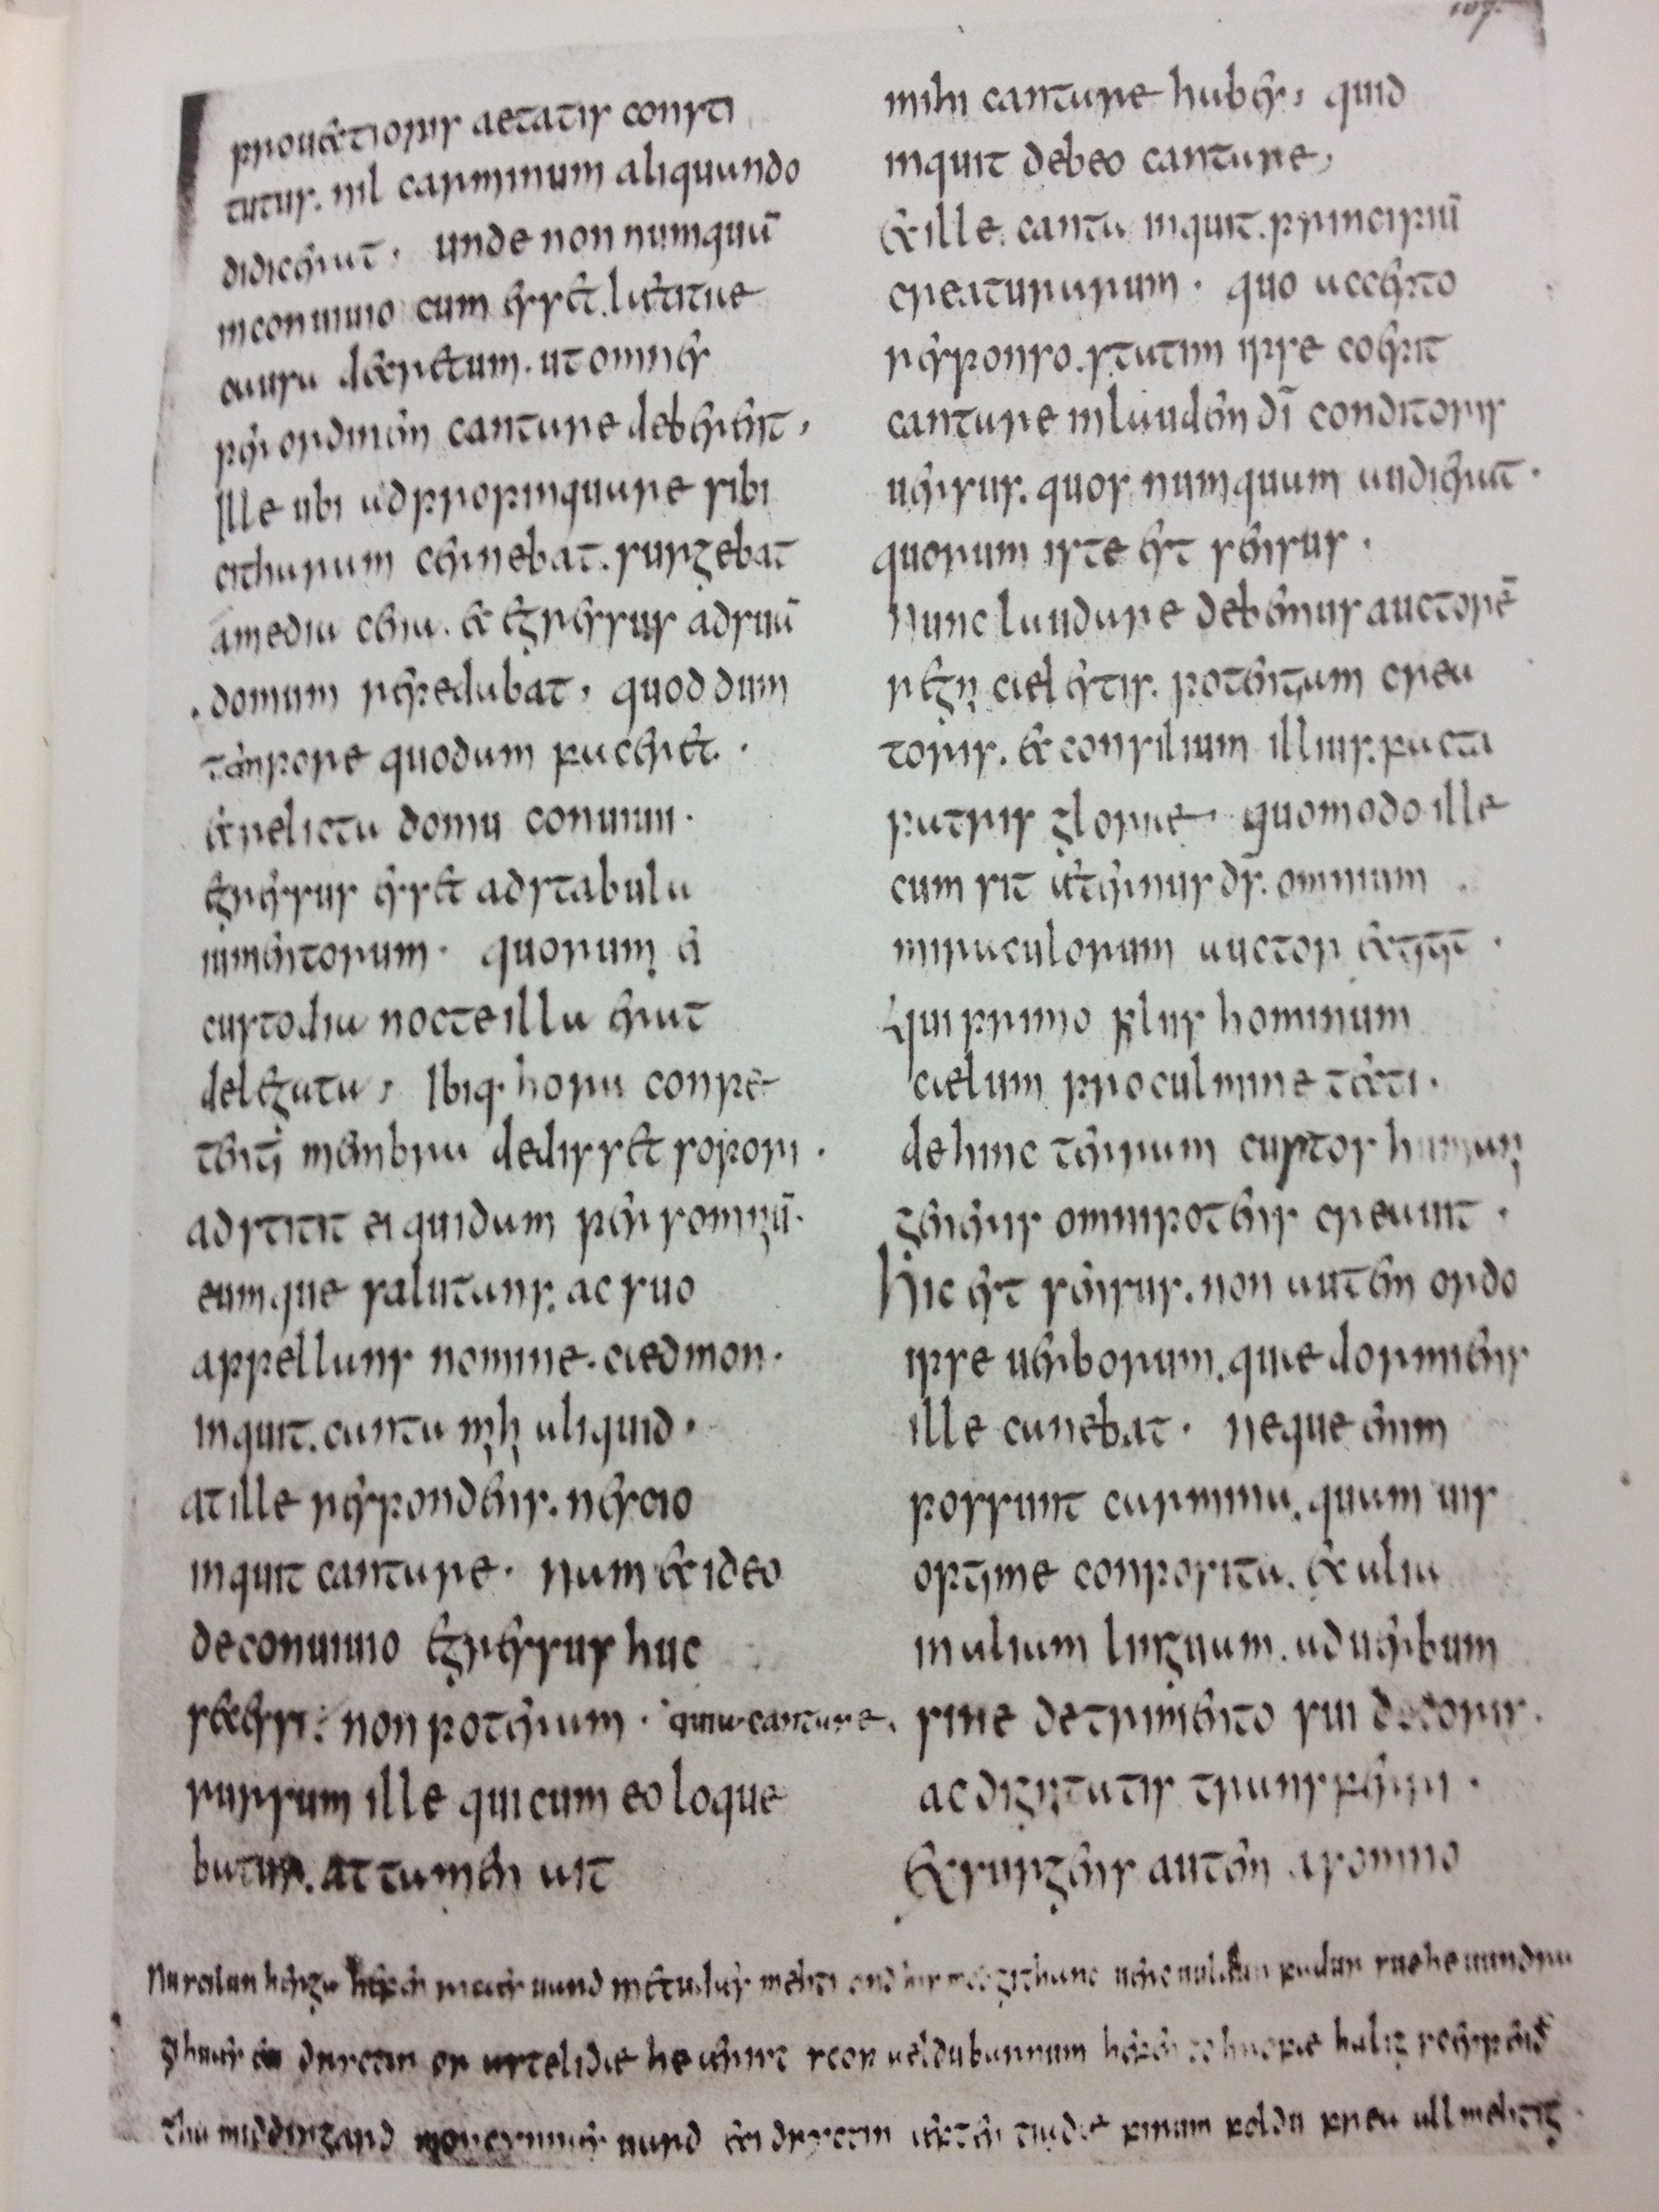 Caedmon's Hymn as a miniscule gloss along the bottom of the page